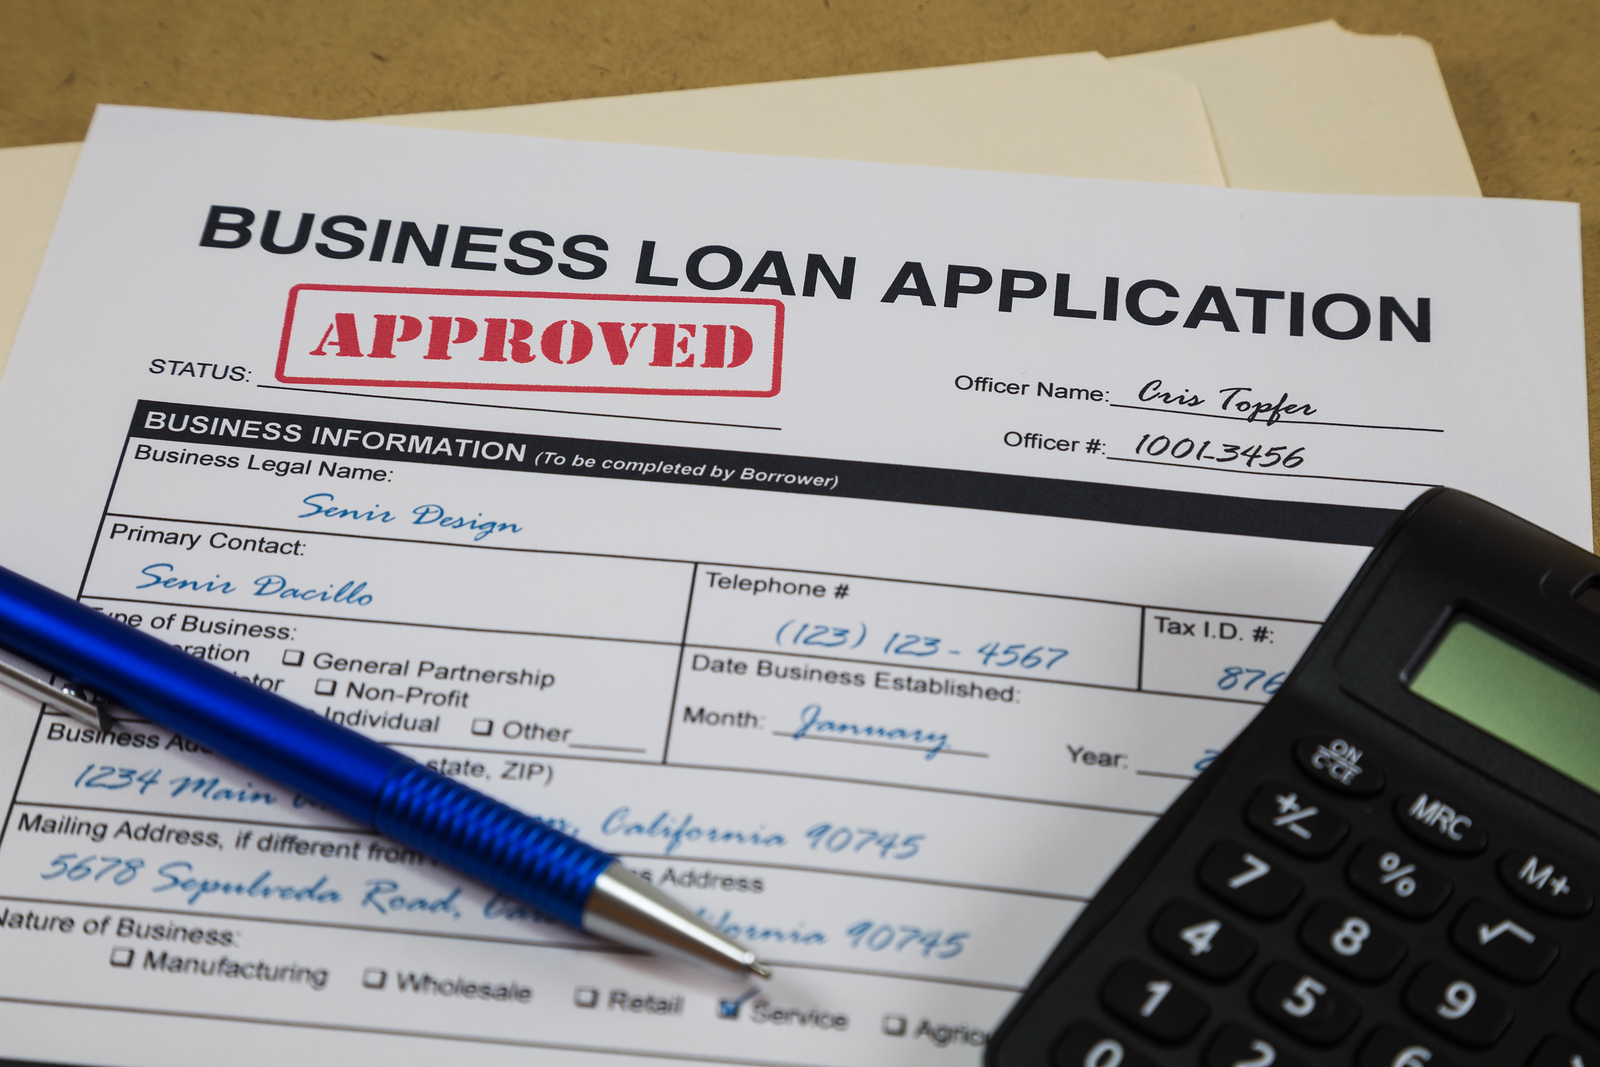 Advocates Small Businesses Need Protection Against 'Predatory' Lenders InsideSources